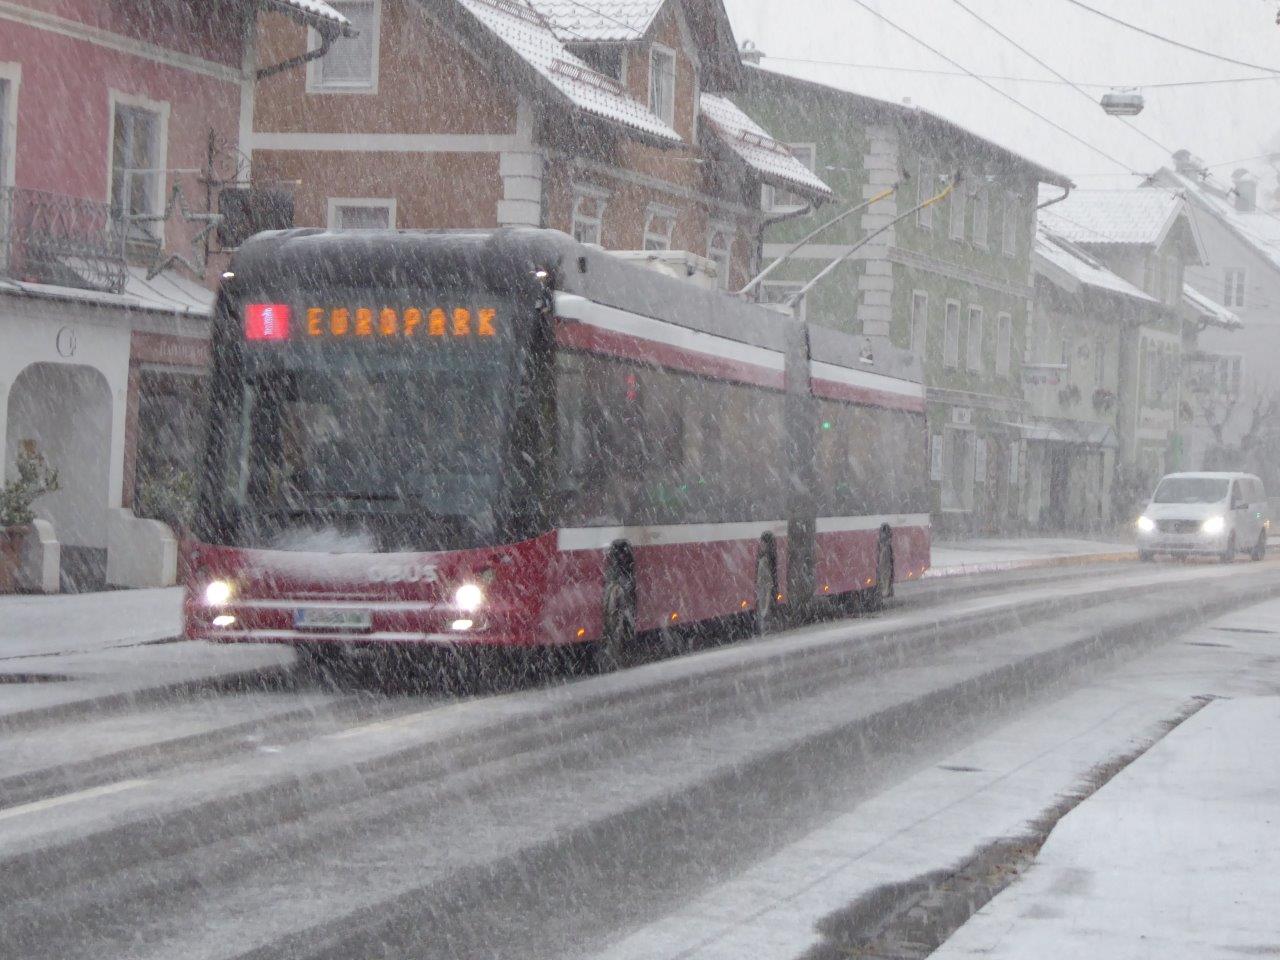 Salzburg trolleybuses can deal with slippery situations, but not with unreasonable politics